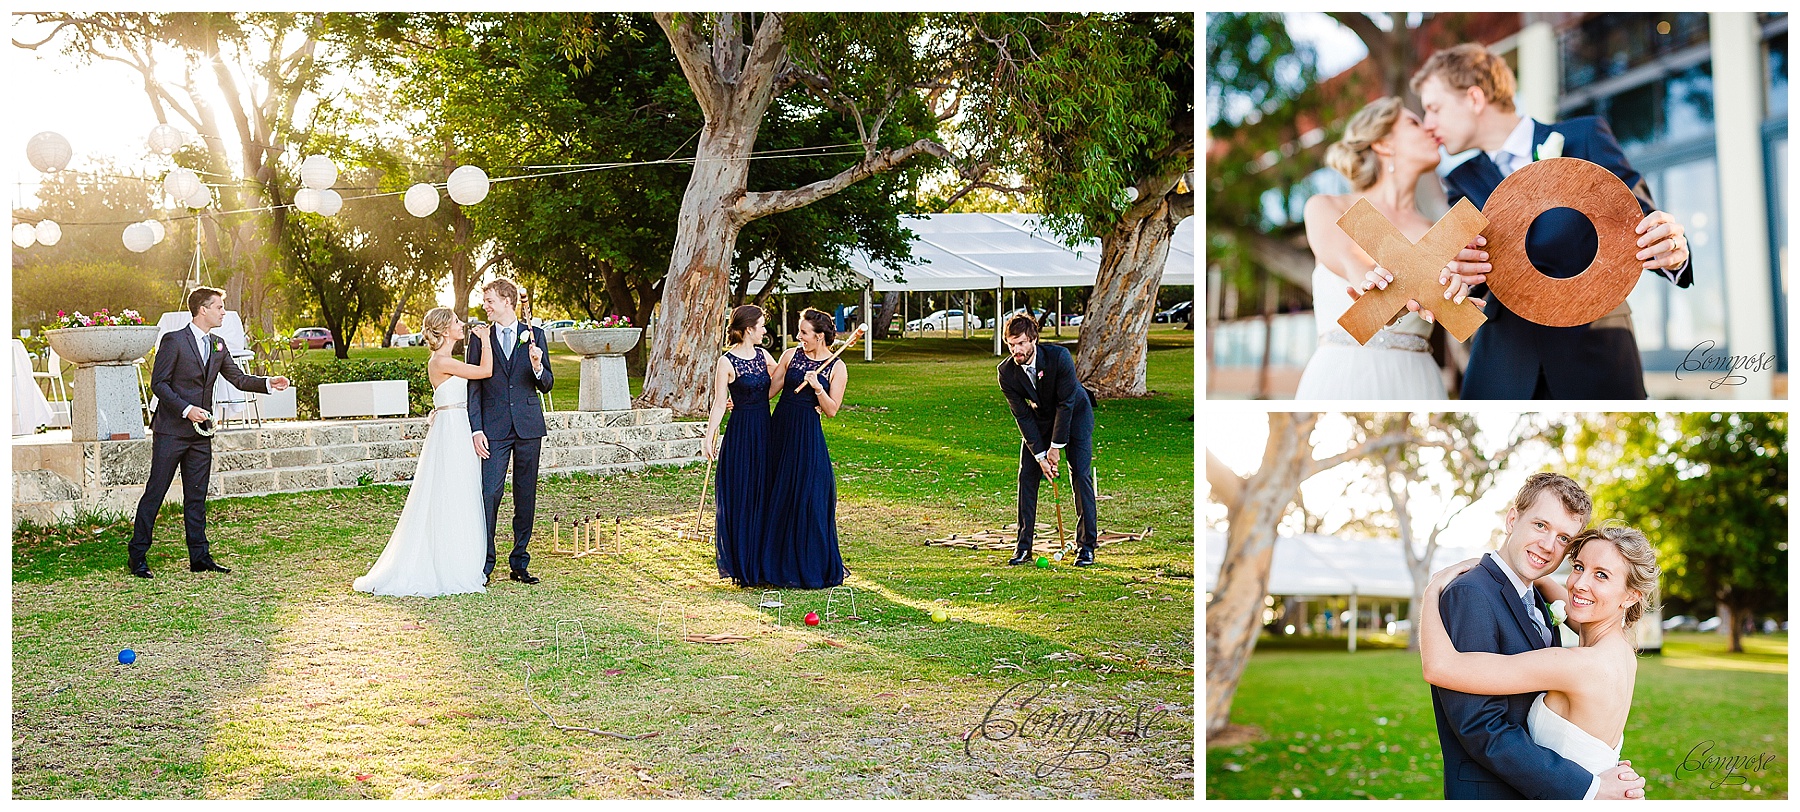 outdoor games for weddings perth 